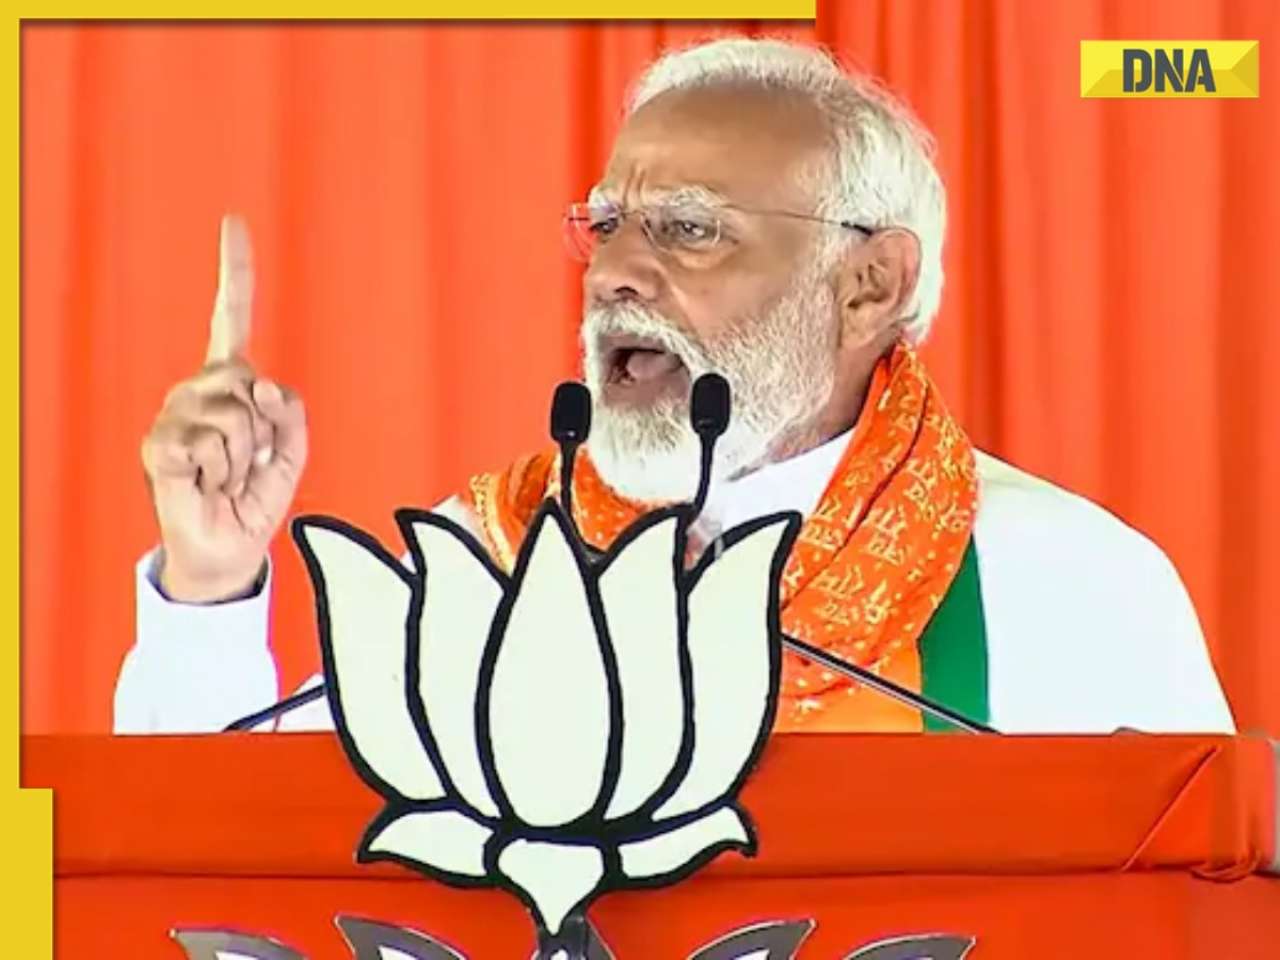 'They hurled 104th abuse today': PM Modi reacts to Sanjay Raut's 'Aurangzeb' jibe, targets opposition